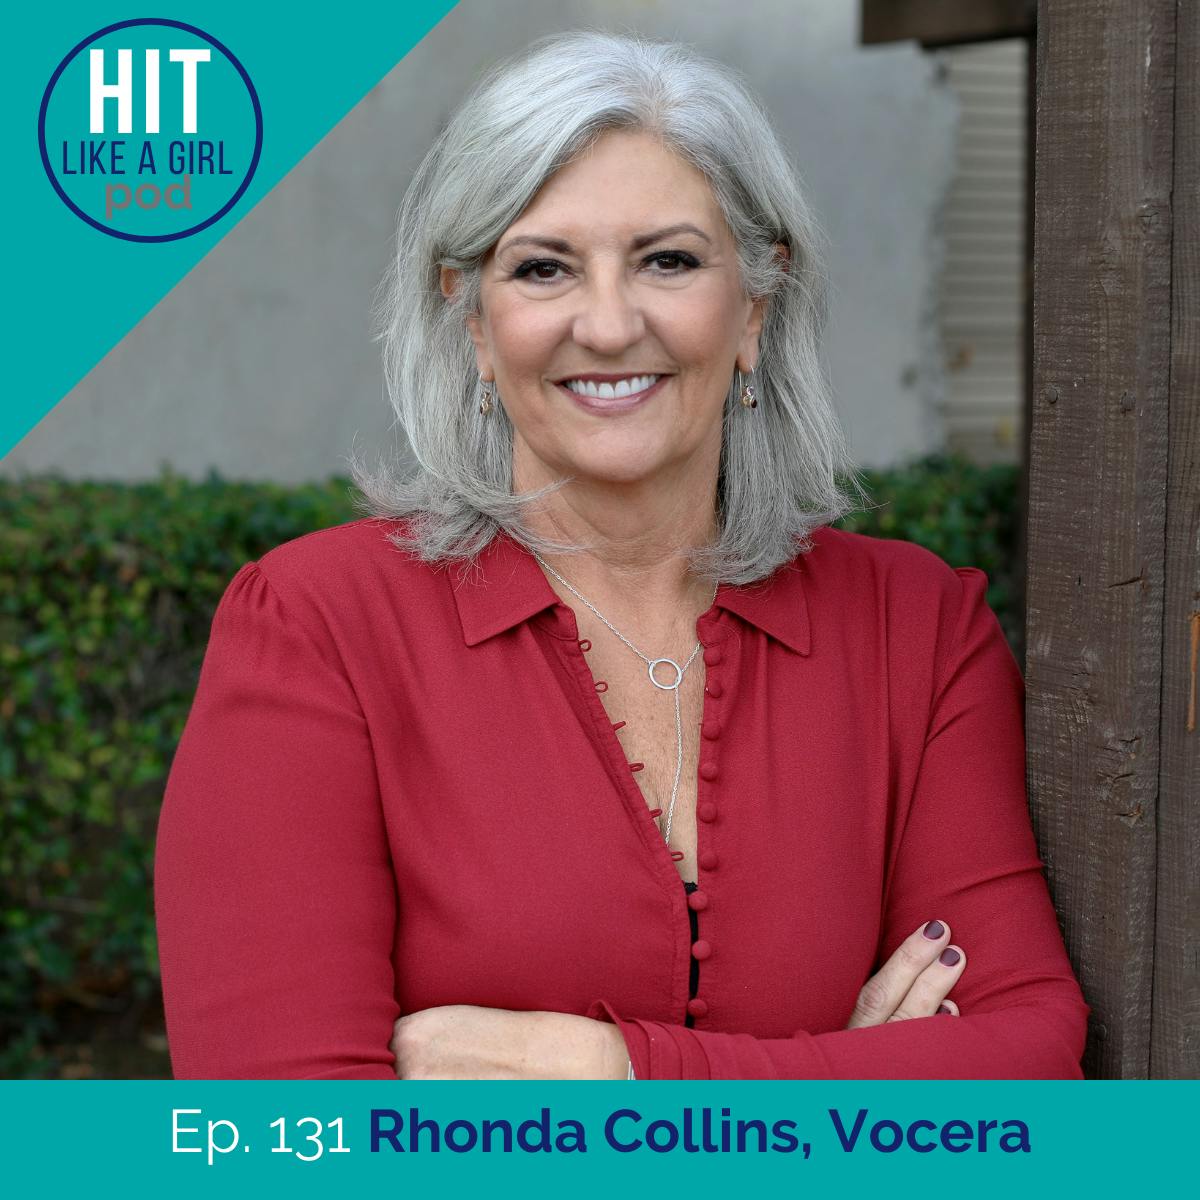 Rhonda Collins is breaking down communication barriers in hospitals